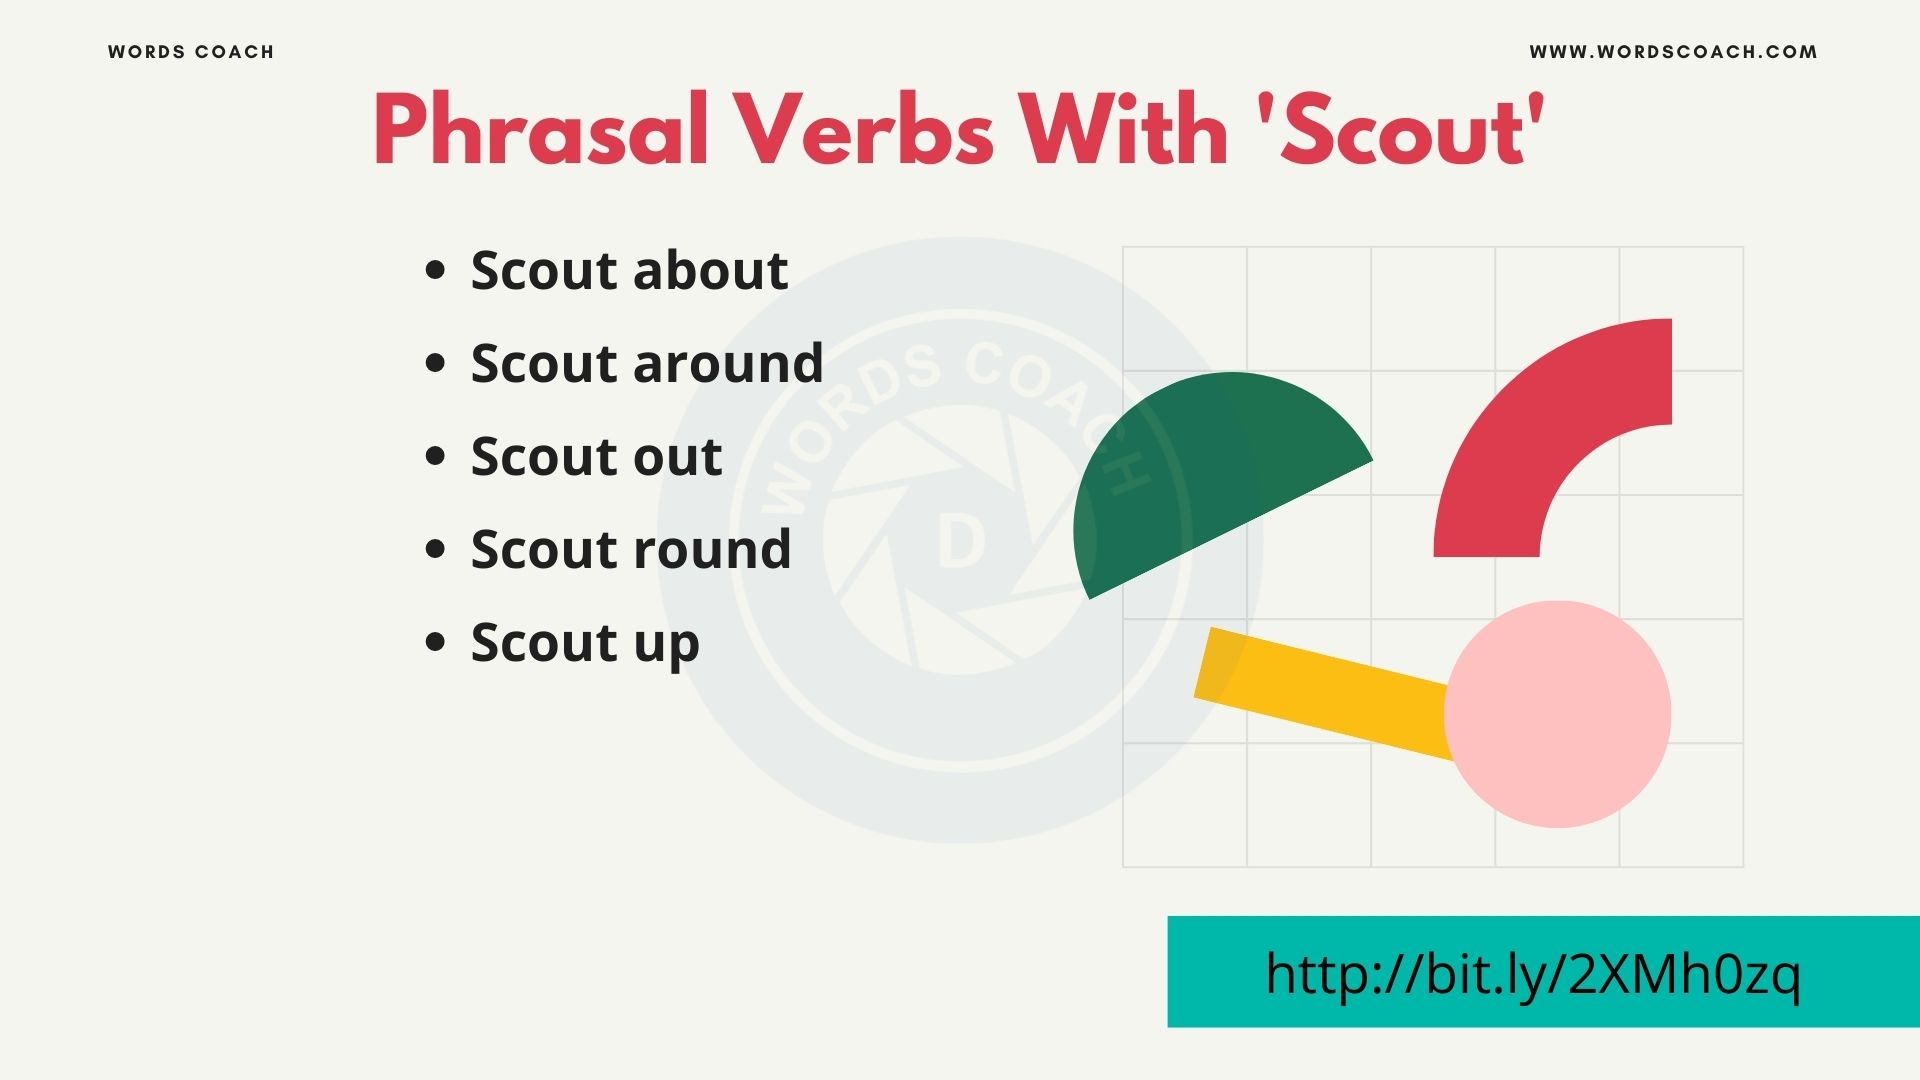 Phrasal Verbs With 'Scout' - wordscoach.com